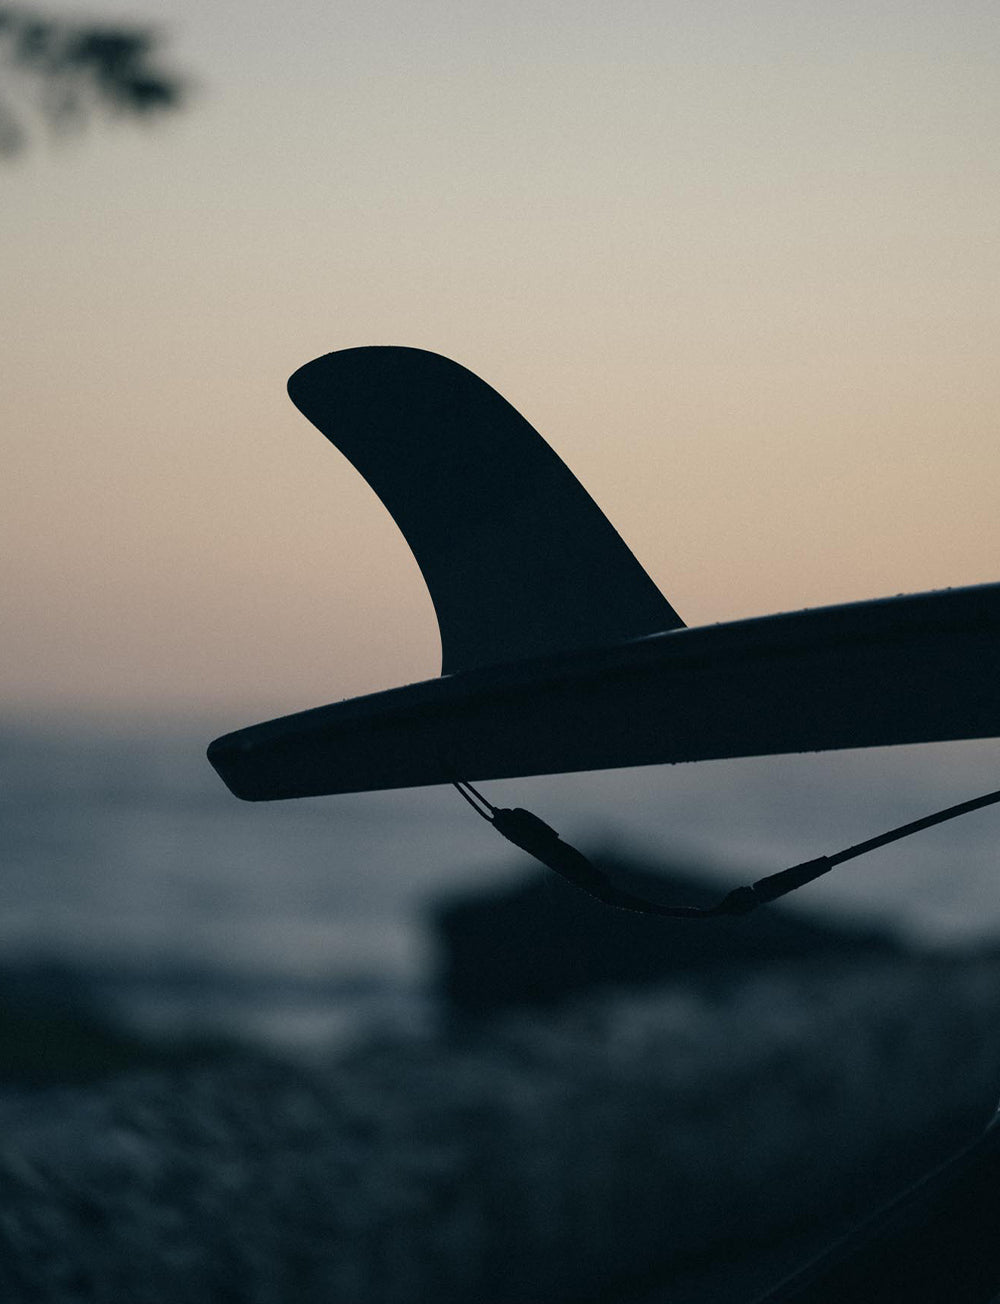 Silhoette of a single-fin longboard surfboard with a dusky sunset background.